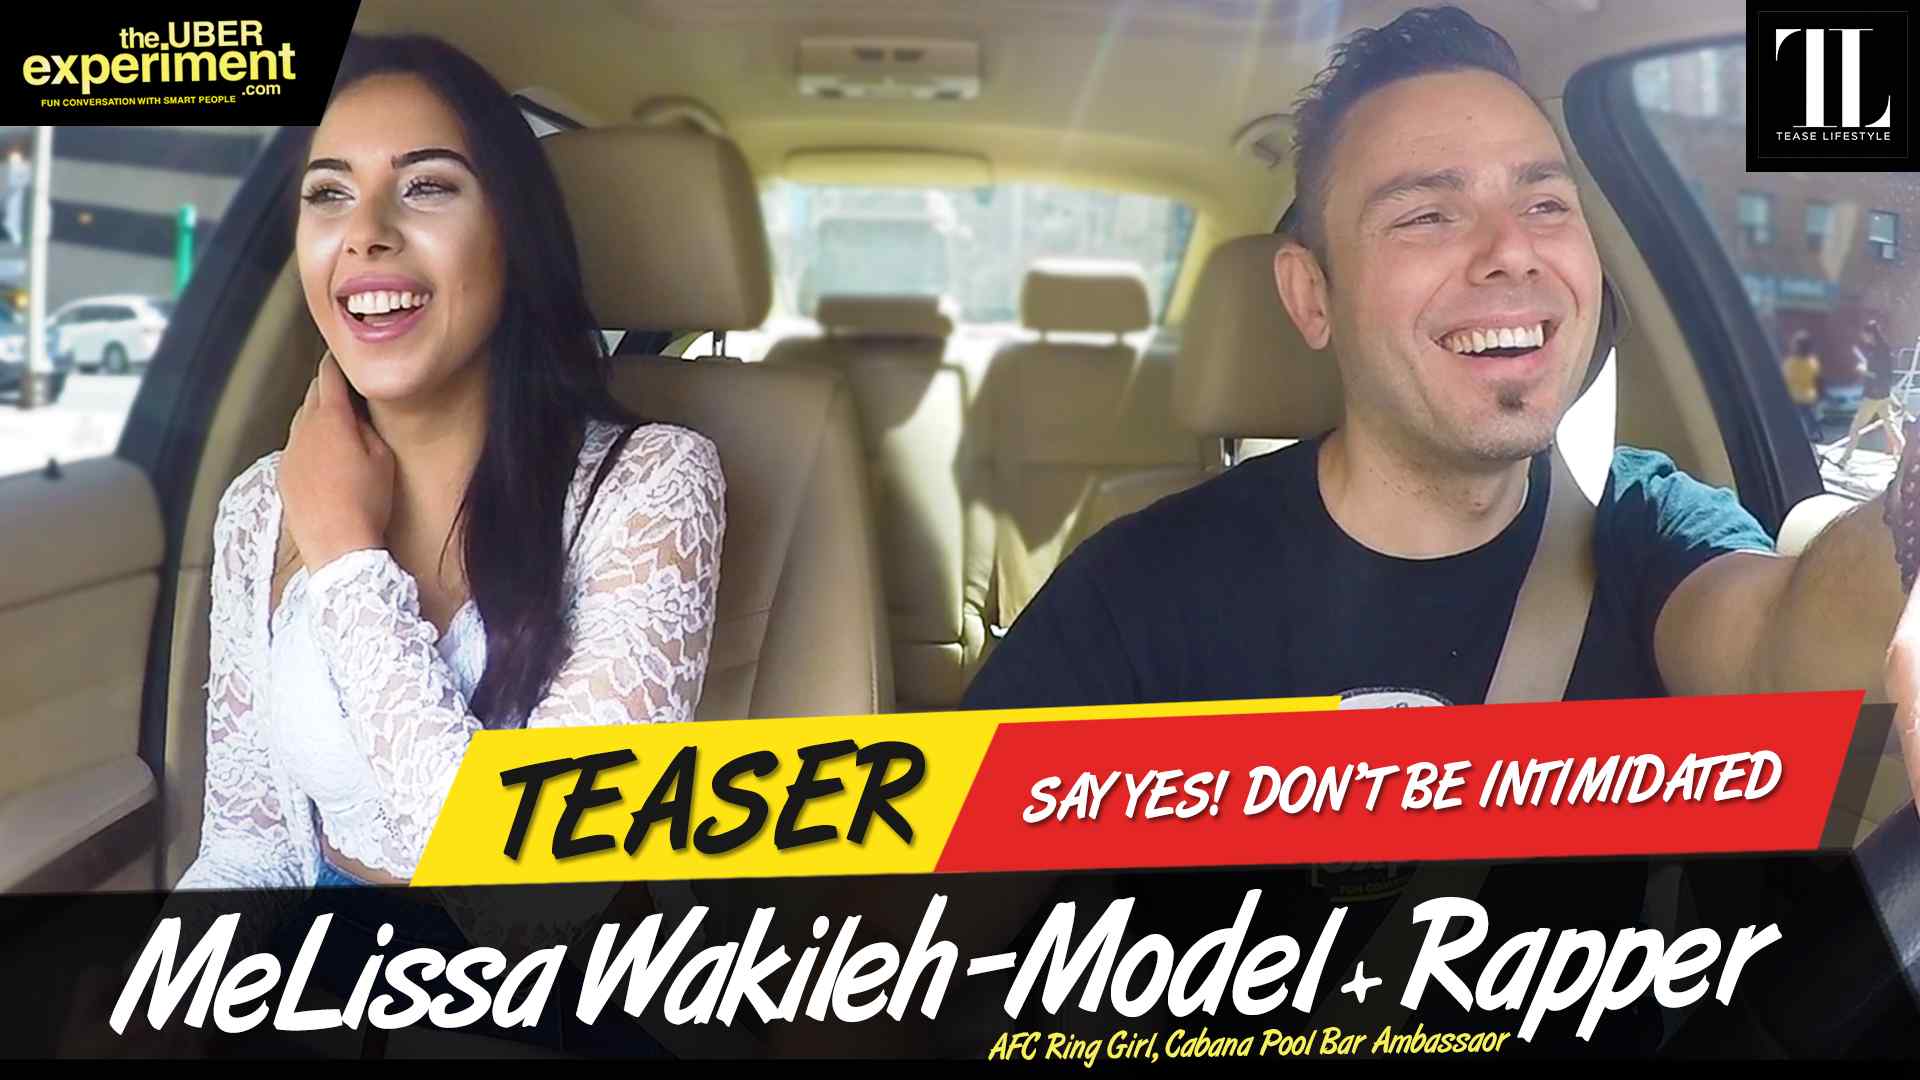 SAY YES! DON'T BE INTIMIDATED - Model, AFC Girl MELISSA WAKILEH on The Uber Experiment Reality Show